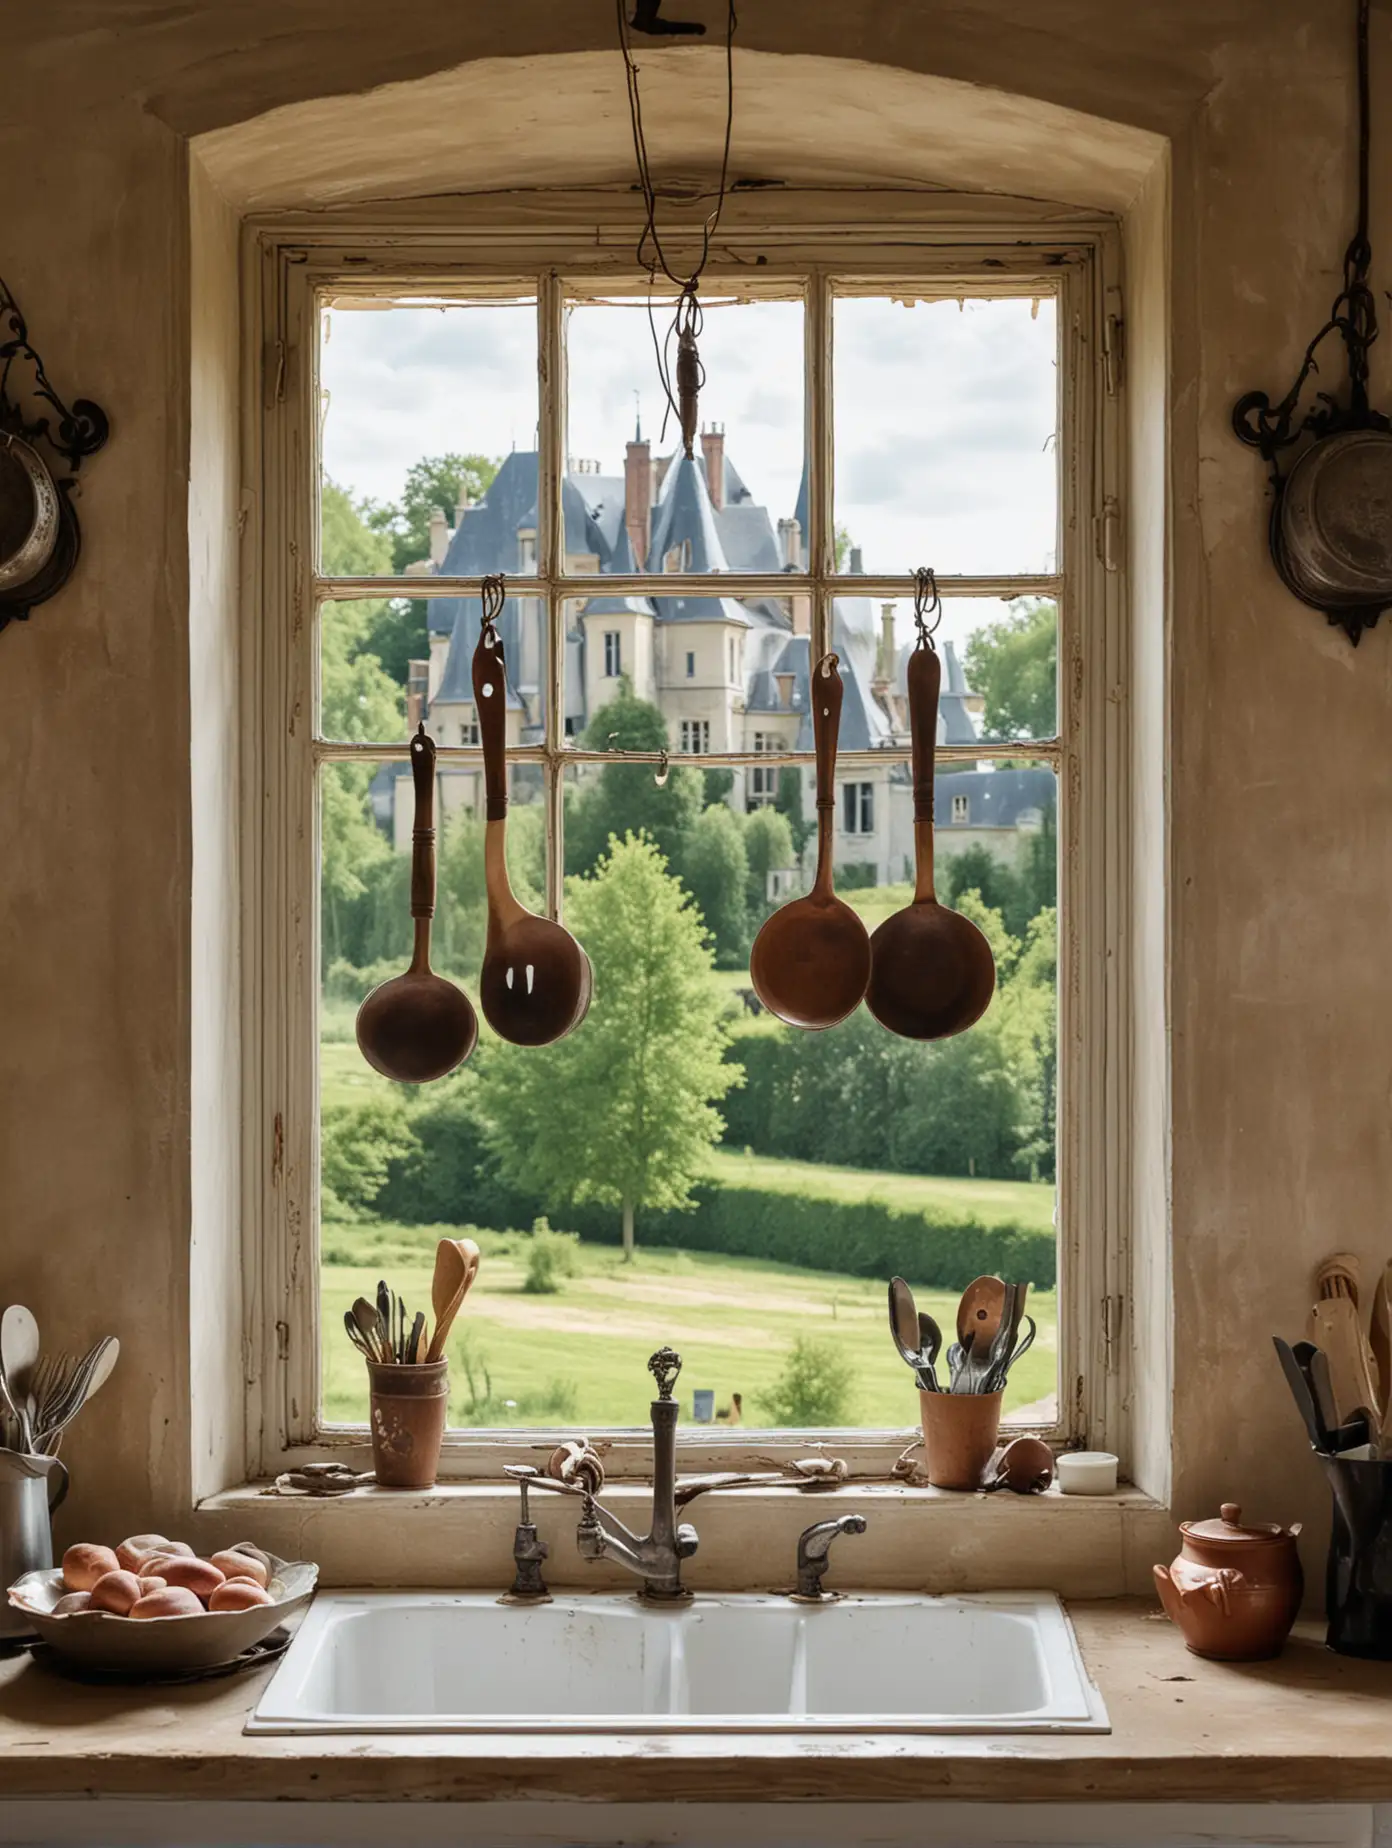 French Chateau View from Farmhouse Kitchen Window with Hanging Utensils